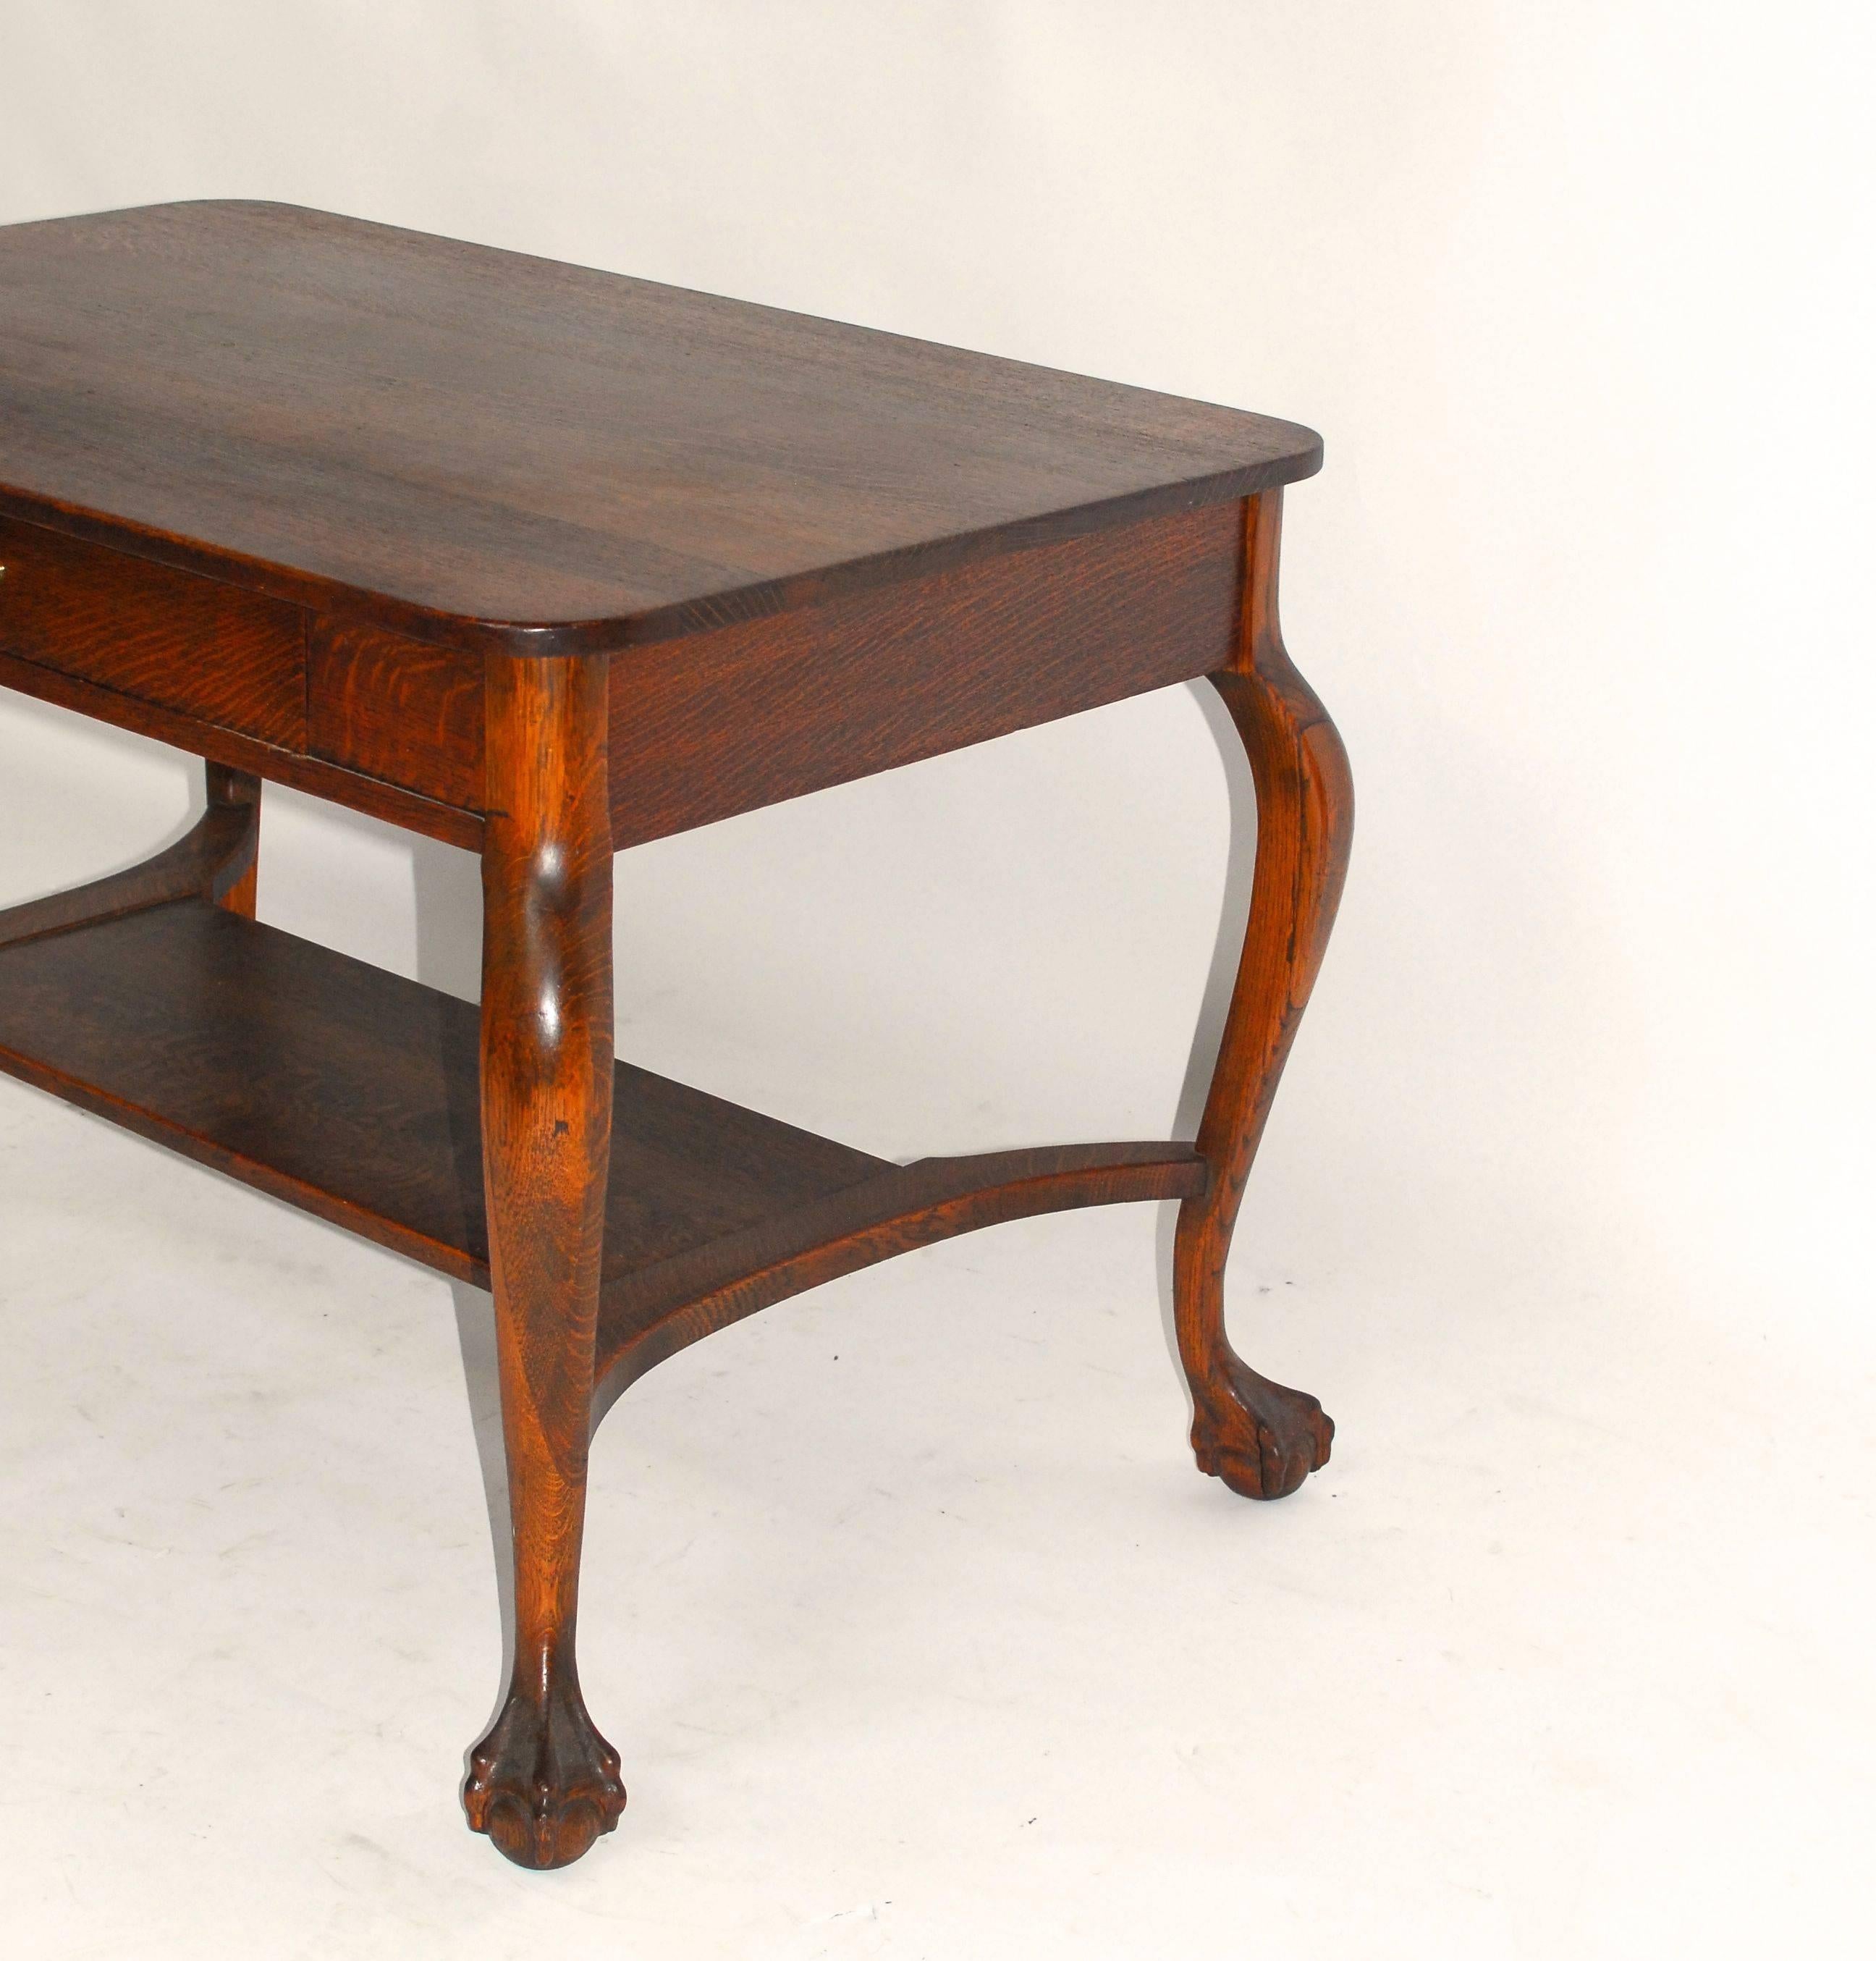 Chippendale style oak library table desk with quarter-sawn panels and delicate, carved cabriole legs with ball and claw feet. It's fronted by one large drawer with a brass metal pull. This elegant writing table also features a stretchered bottom